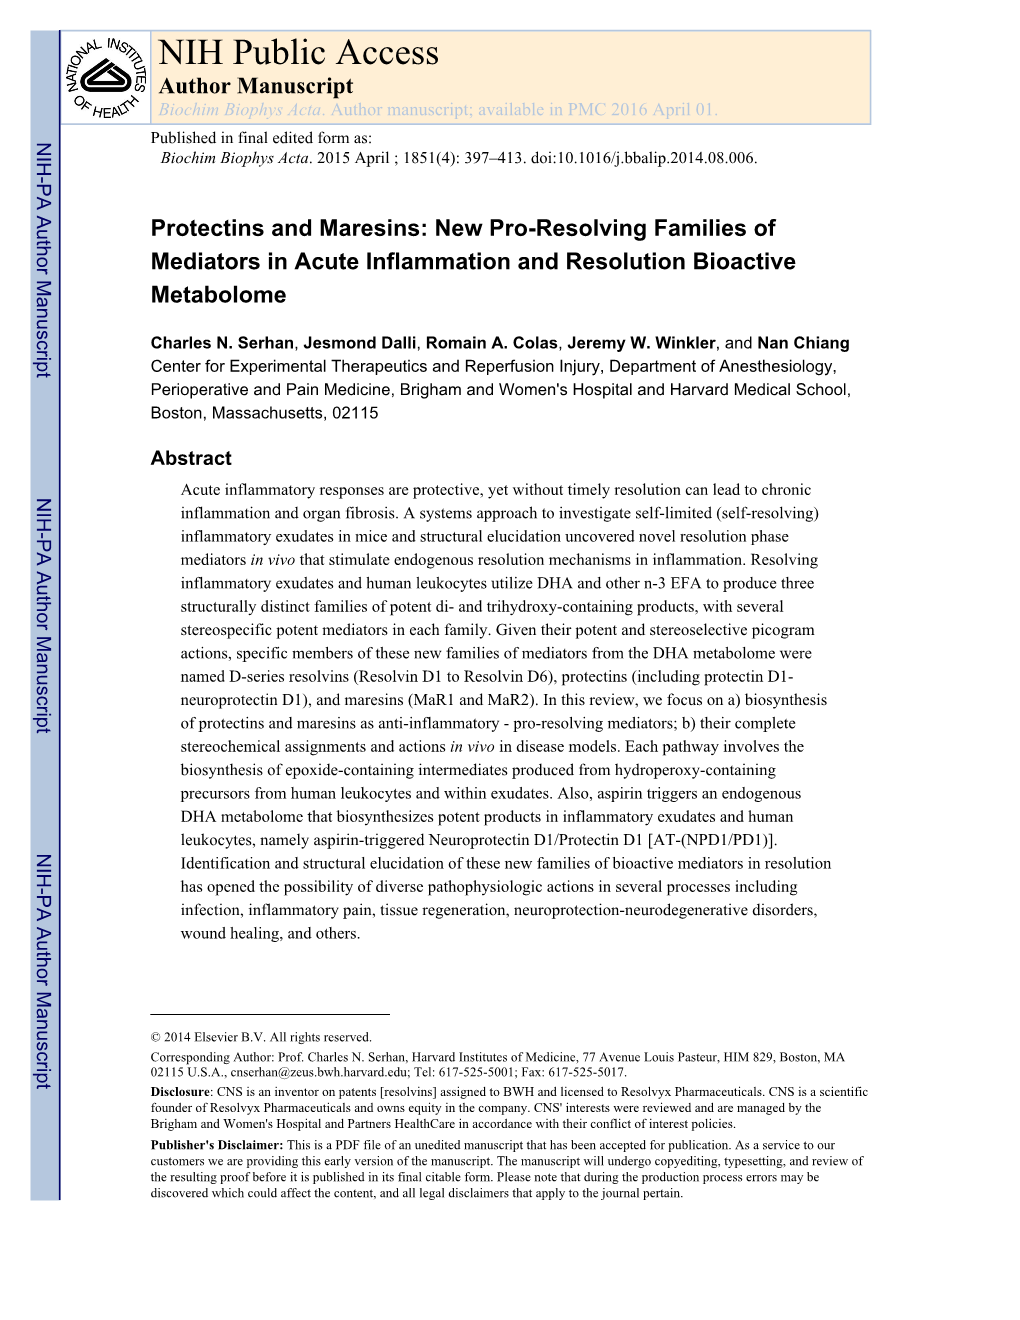 Protectins and Maresins – New Pro-Resolving Families of Mediators in Acute Inflammation and Resolution Bioactive Metabolome